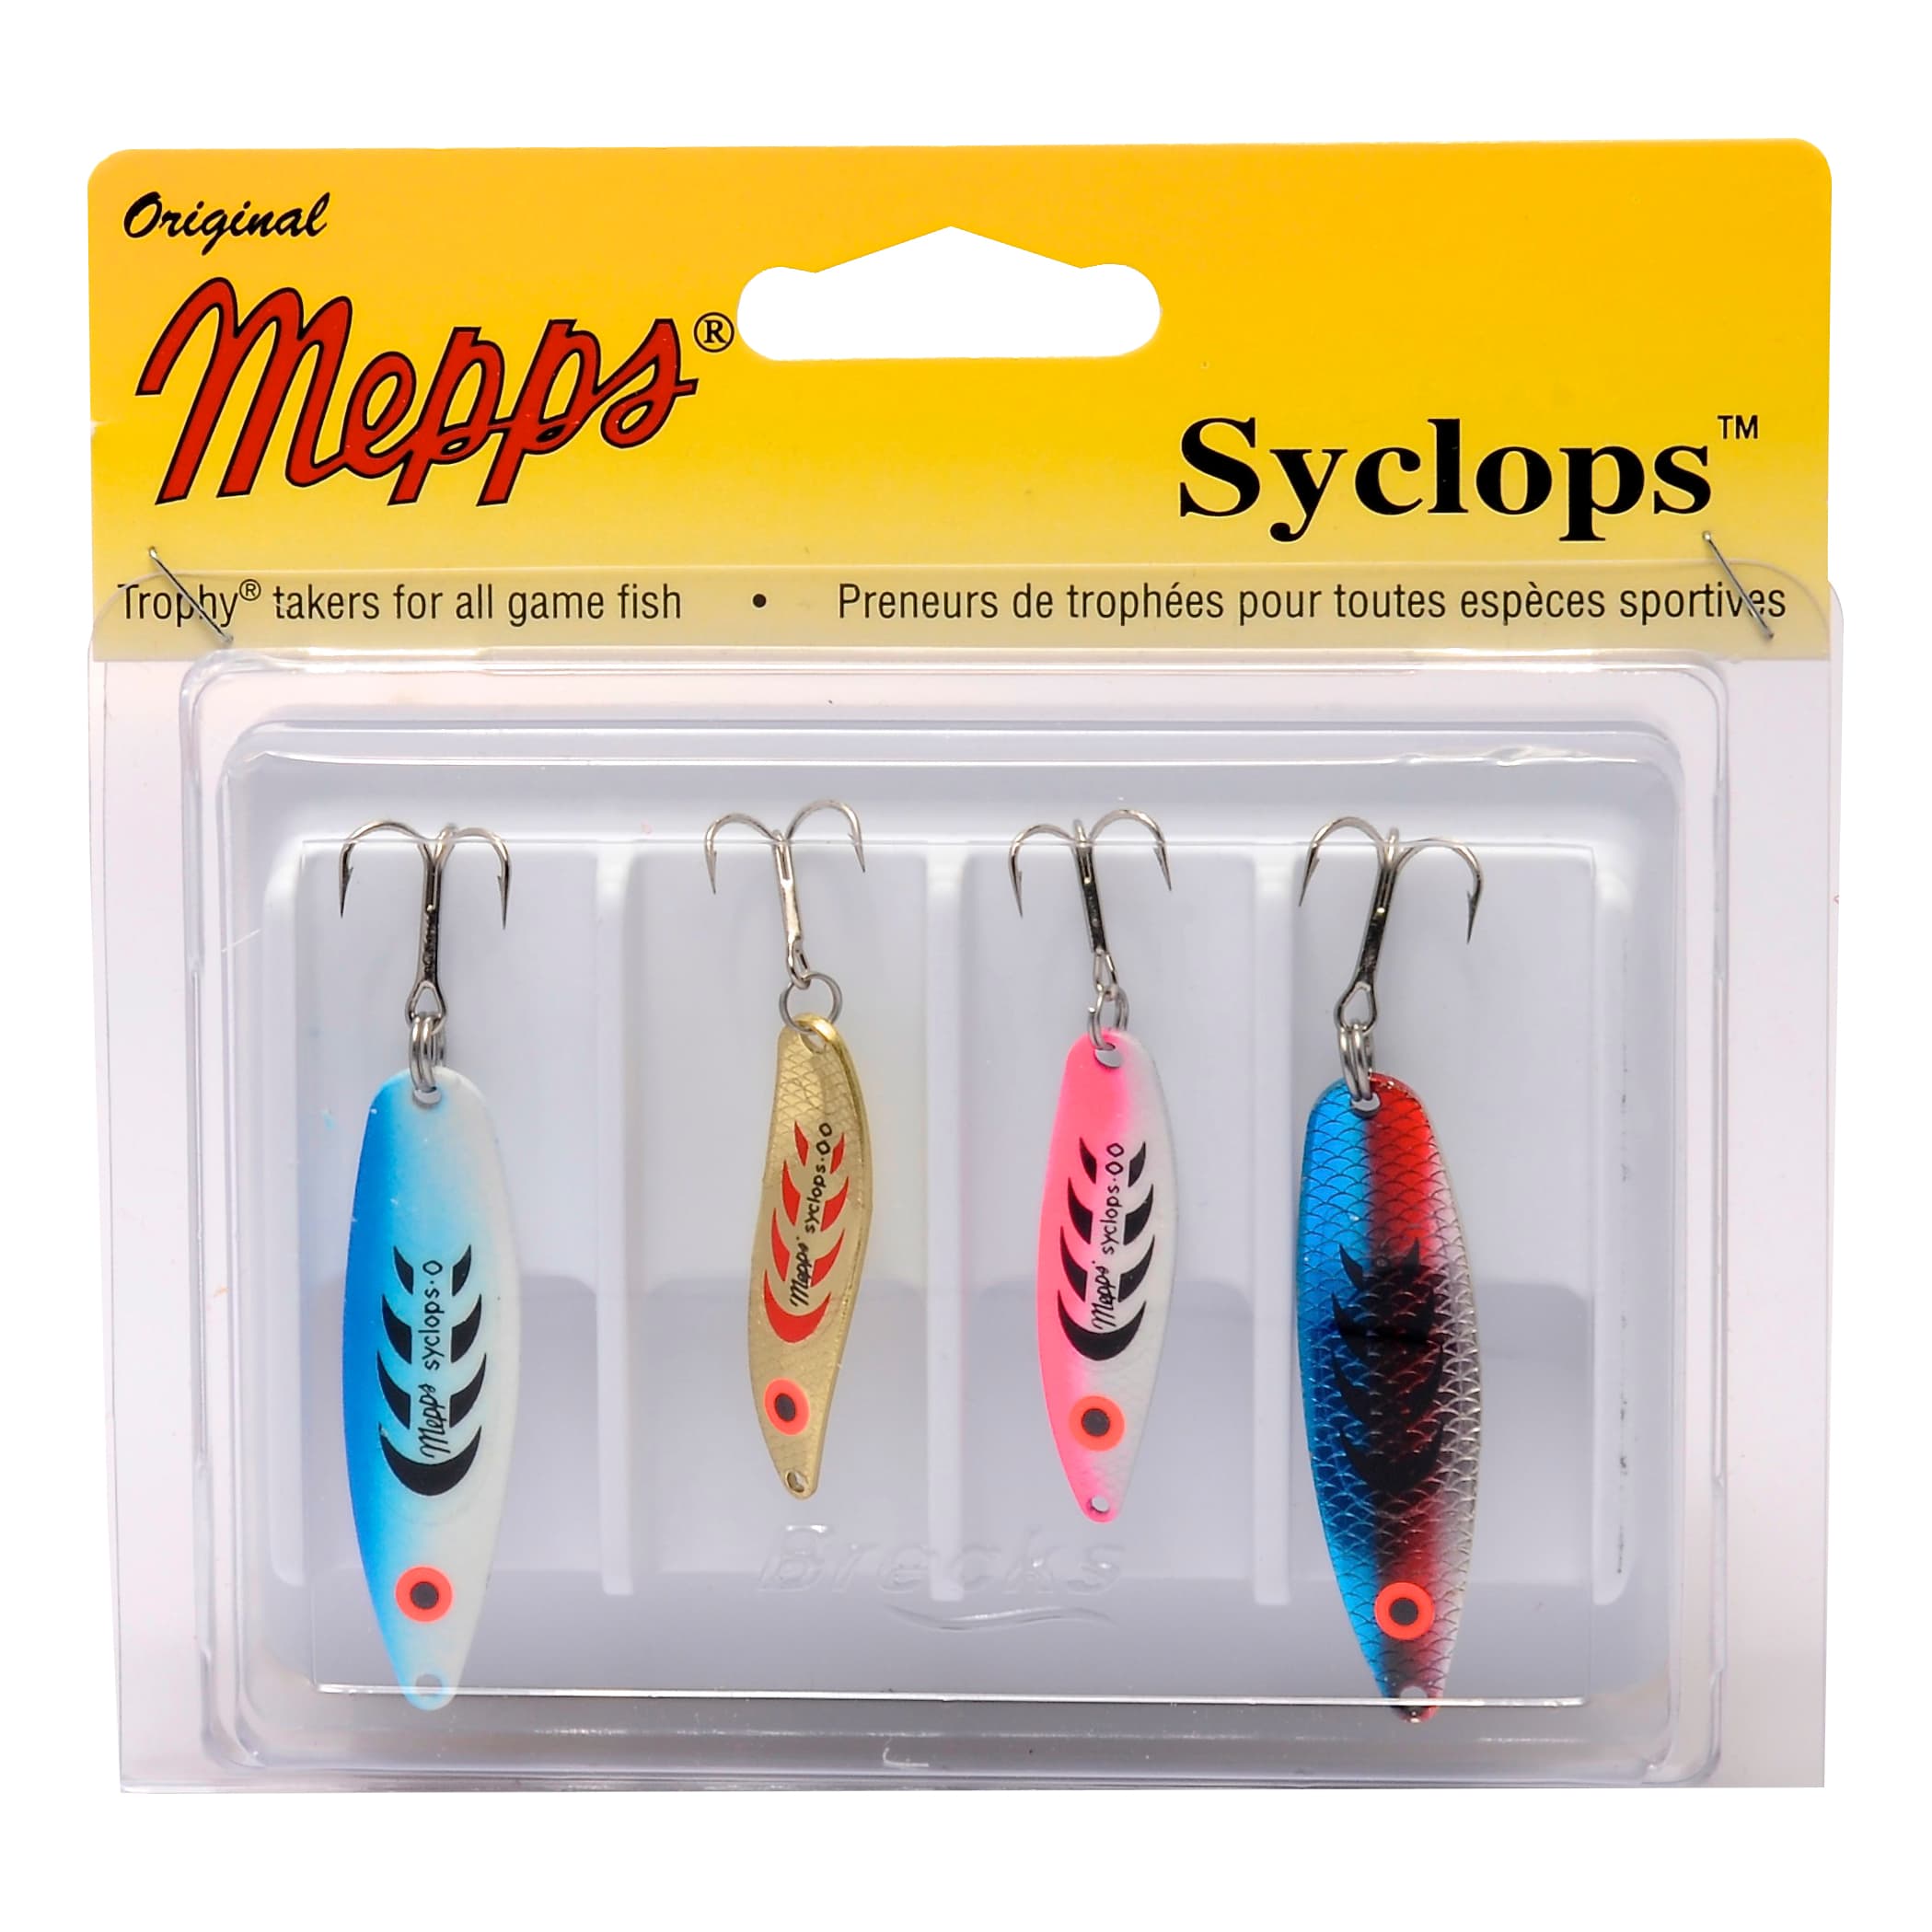 Mepps® Trouter Lure Kit